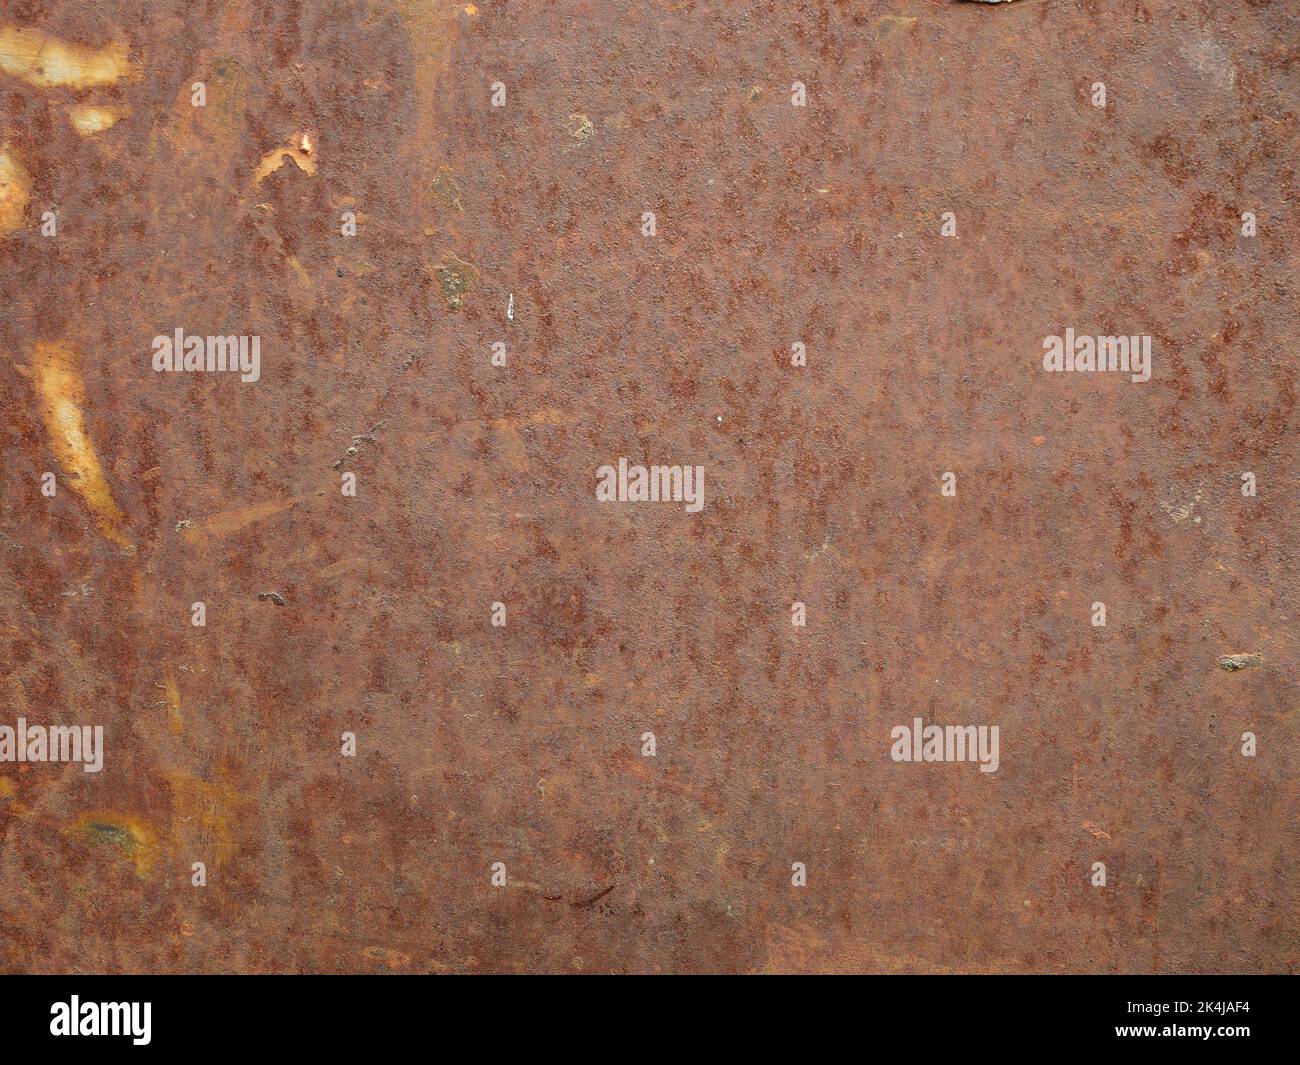 Brown rust stain on surface of the sheet metal , Cracked and flaking surfaces, Abstract background and metalic texture Stock Photo